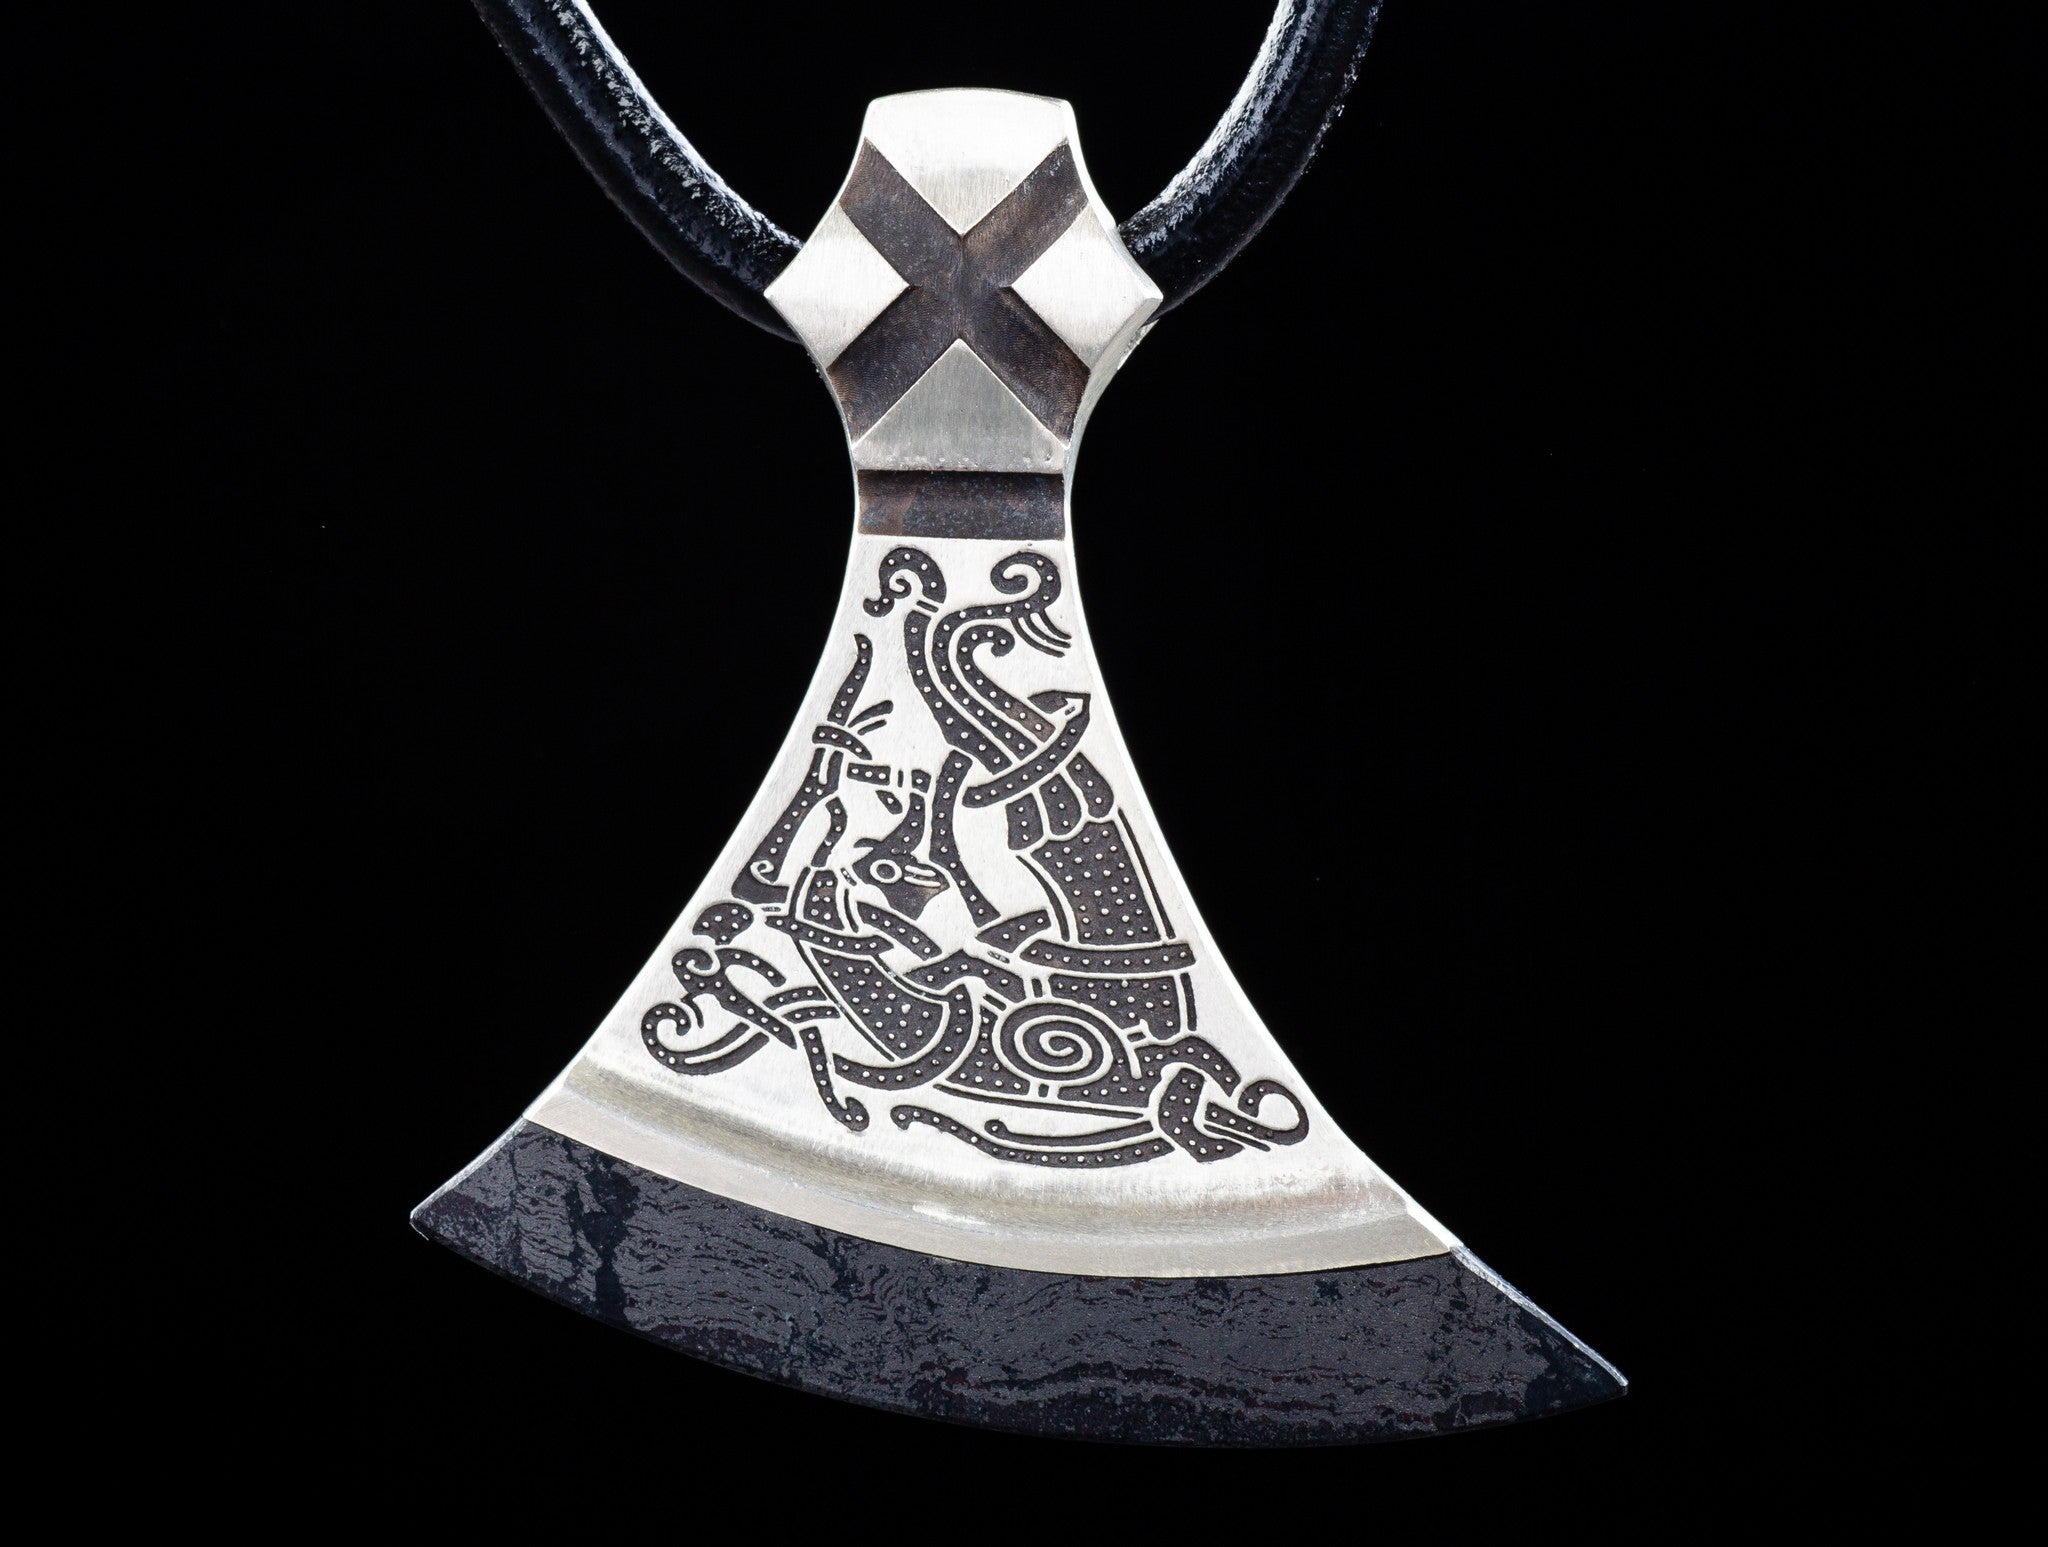 Mammen axe with a large bird ornament